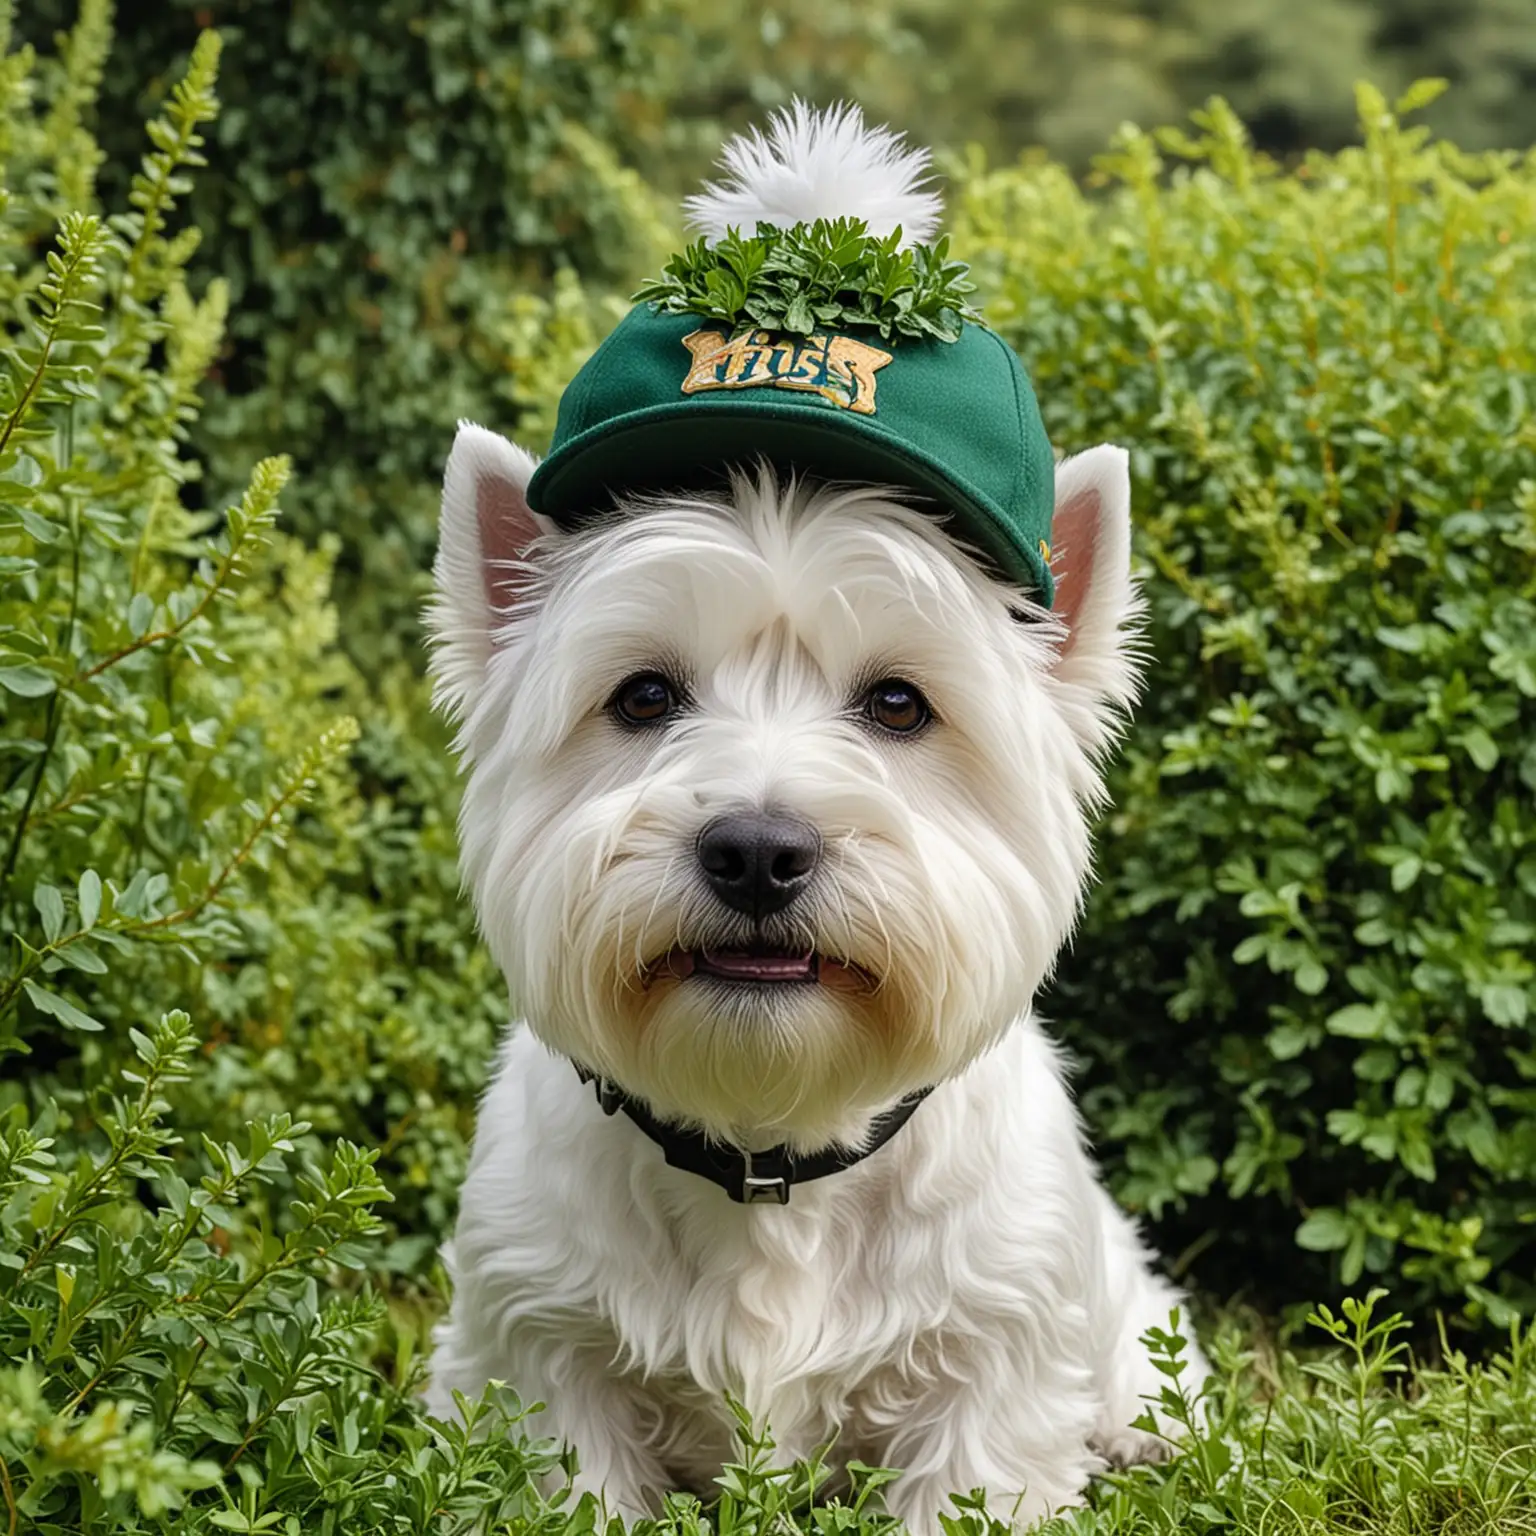 image of a beautifully groomed West Highland White Terrier, wearing an irish cap on his head and have greenery as the background